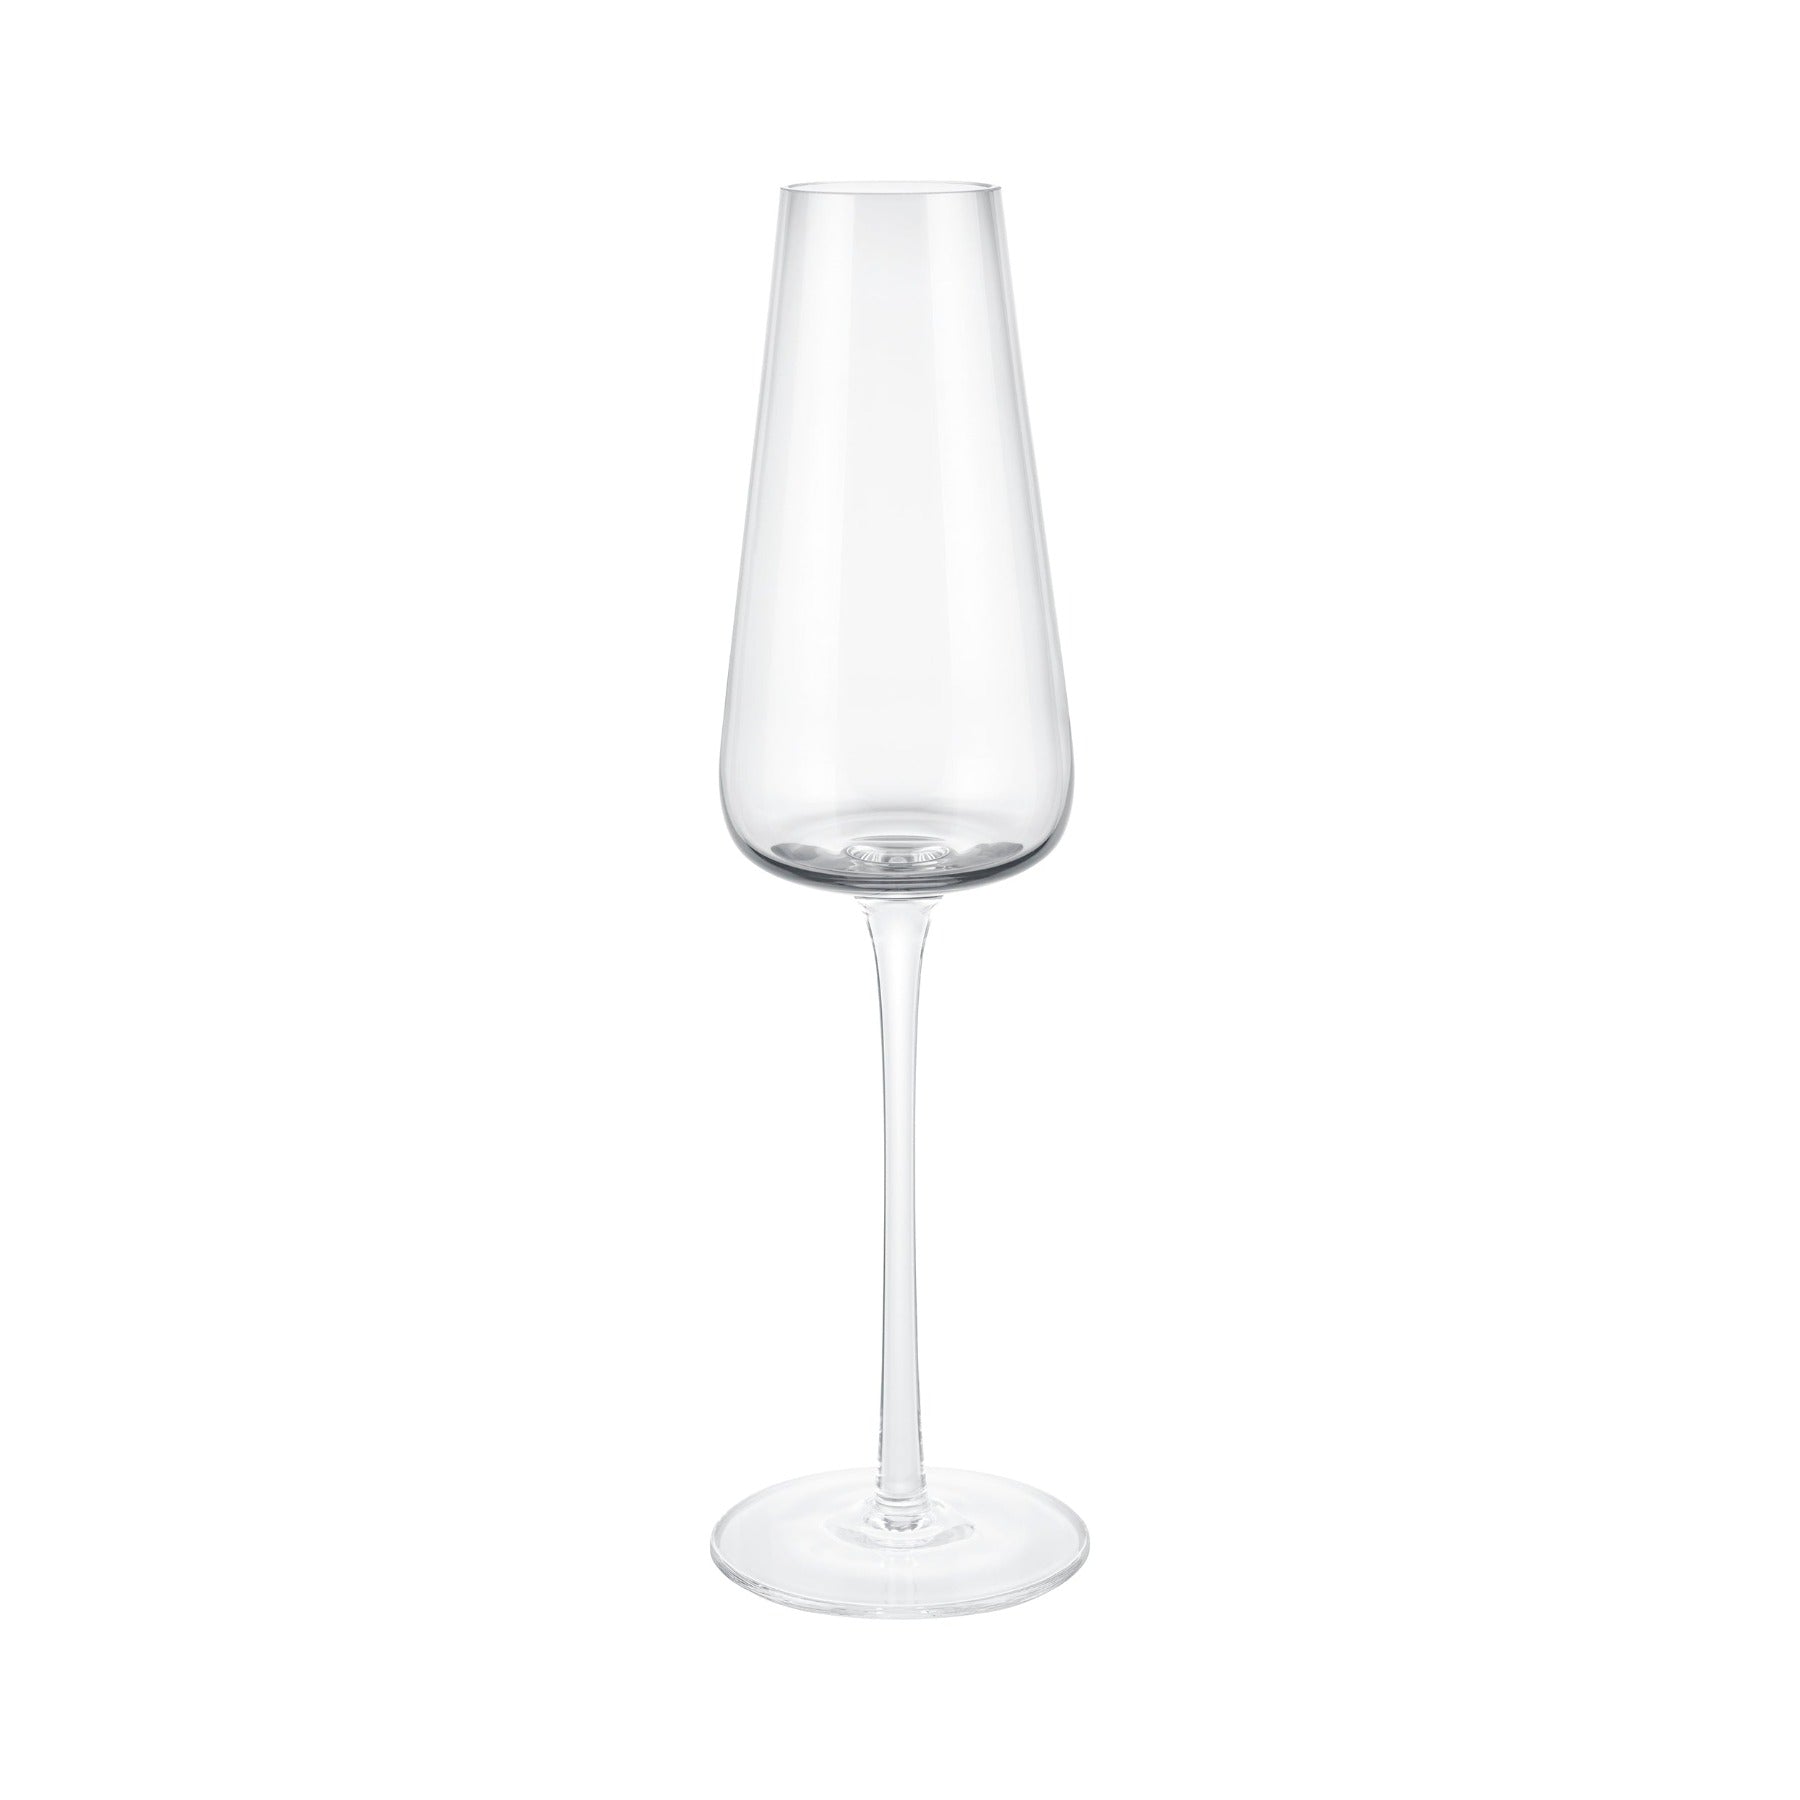 Belo Champagne Flute Glasses - 7 Ounce - Set of 6 - Clear Glass